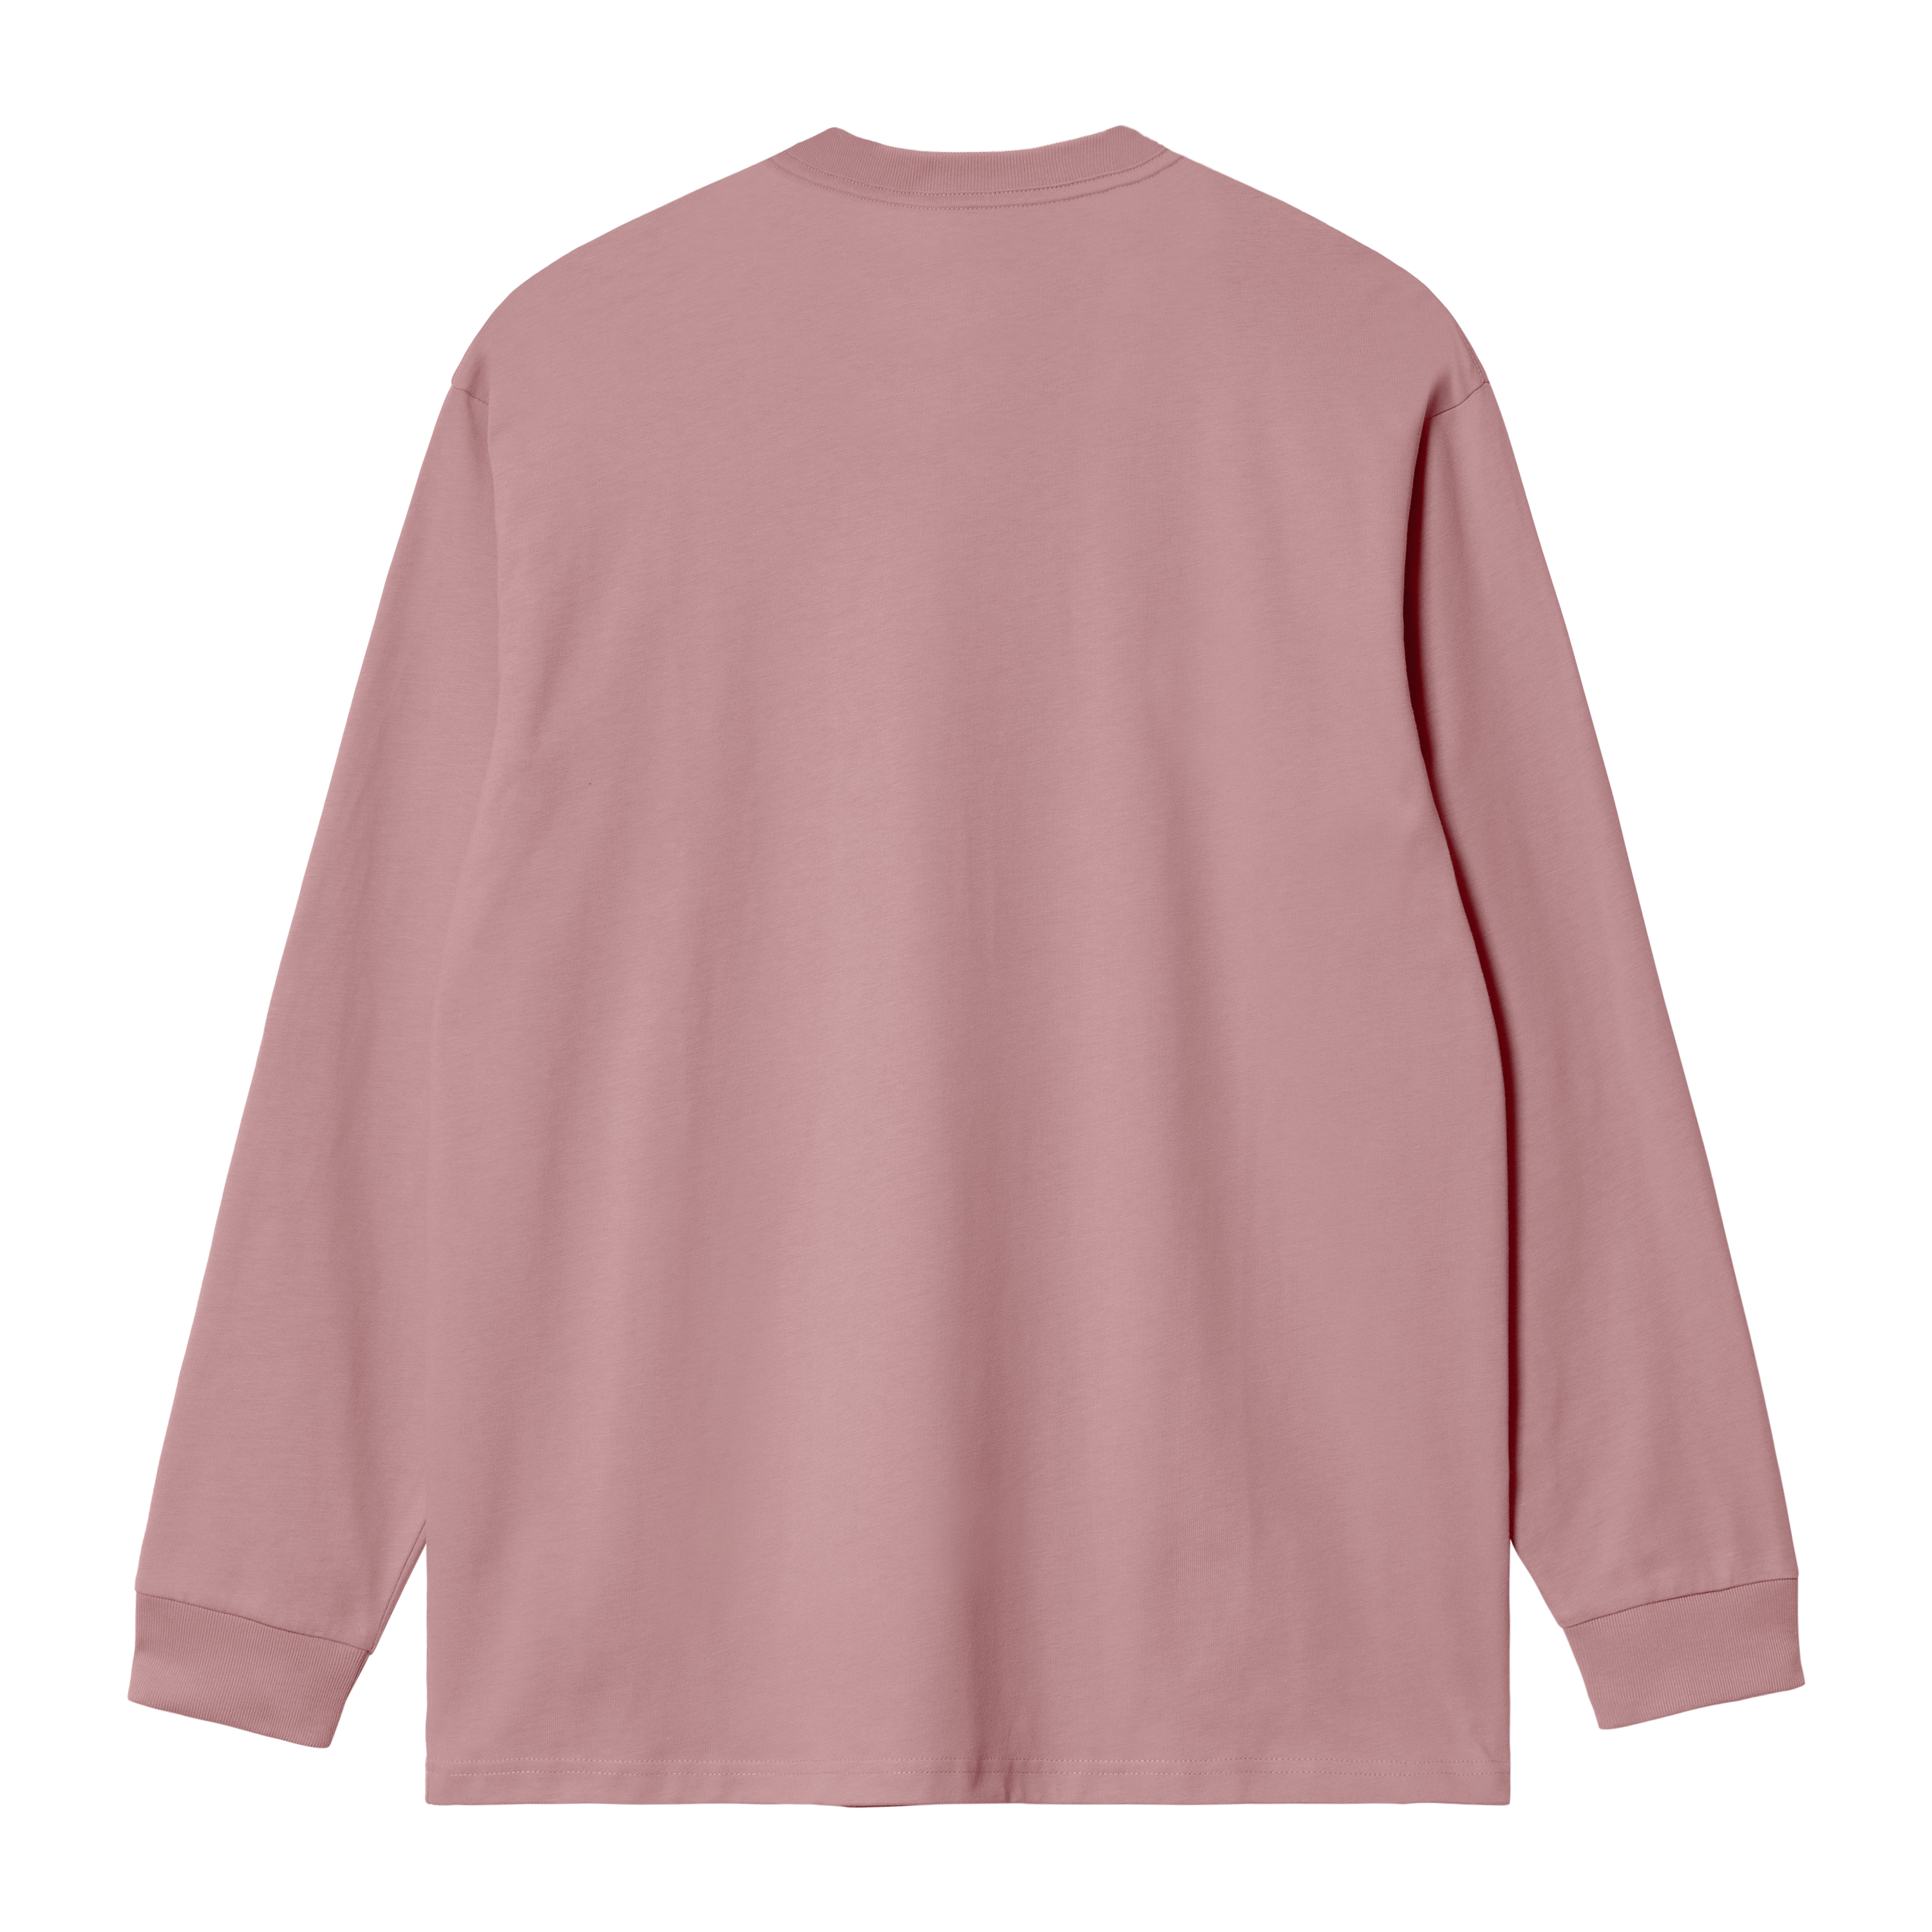 Carhartt WIP - L/S CHASE T-SHIRT - Glassy Pink/Gold